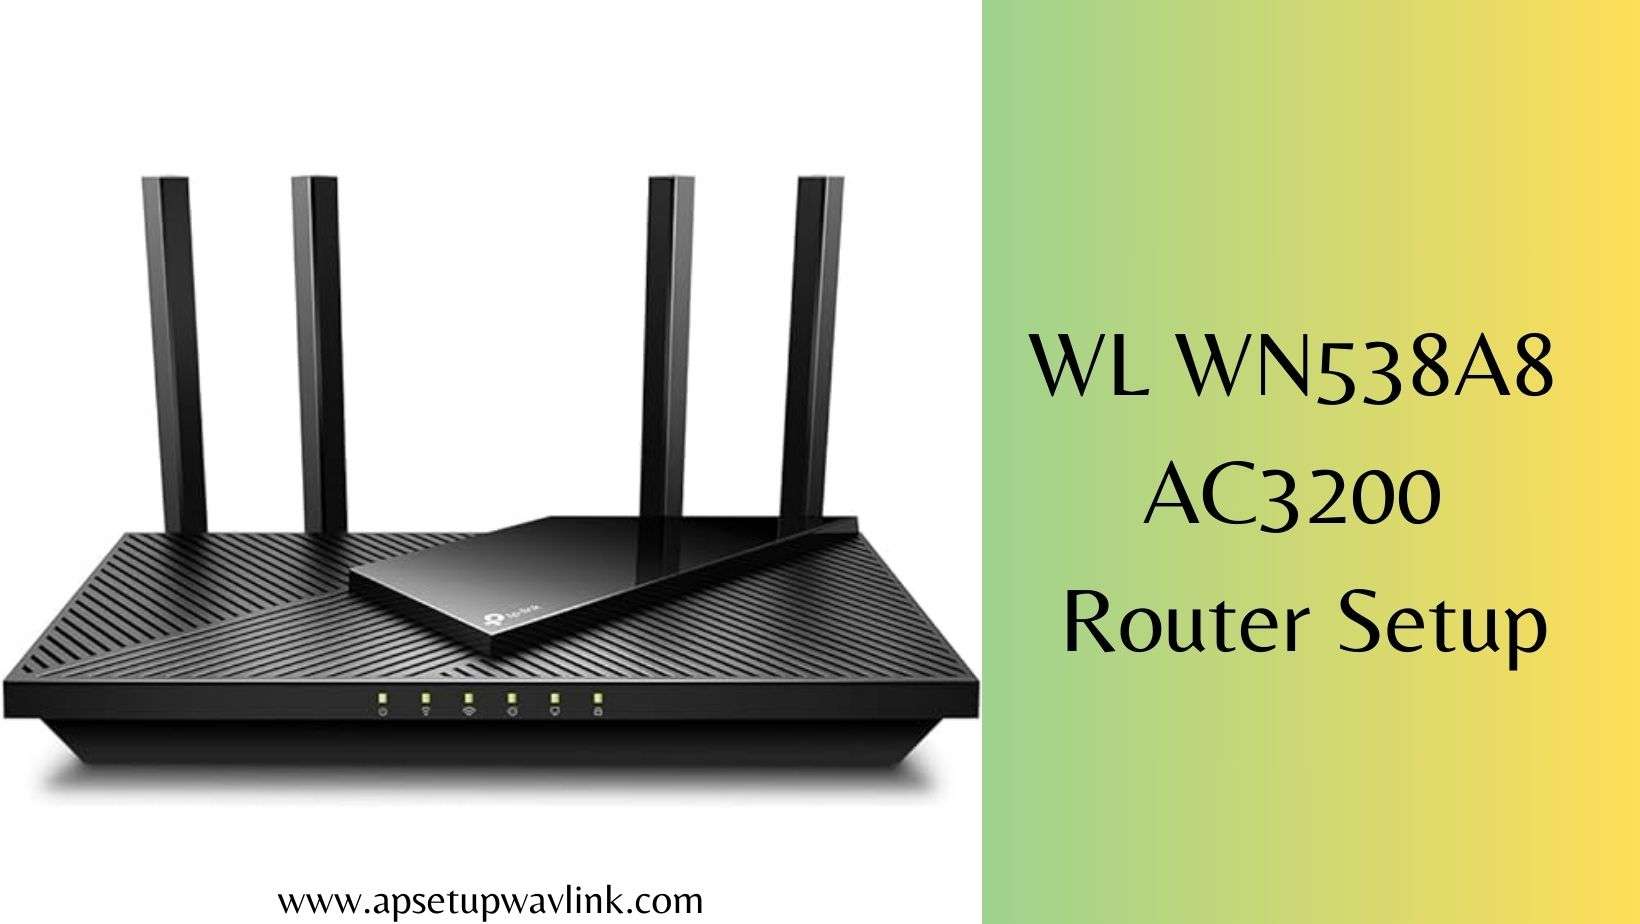 You are currently viewing WL WN538A8 AC3200 Router Setup